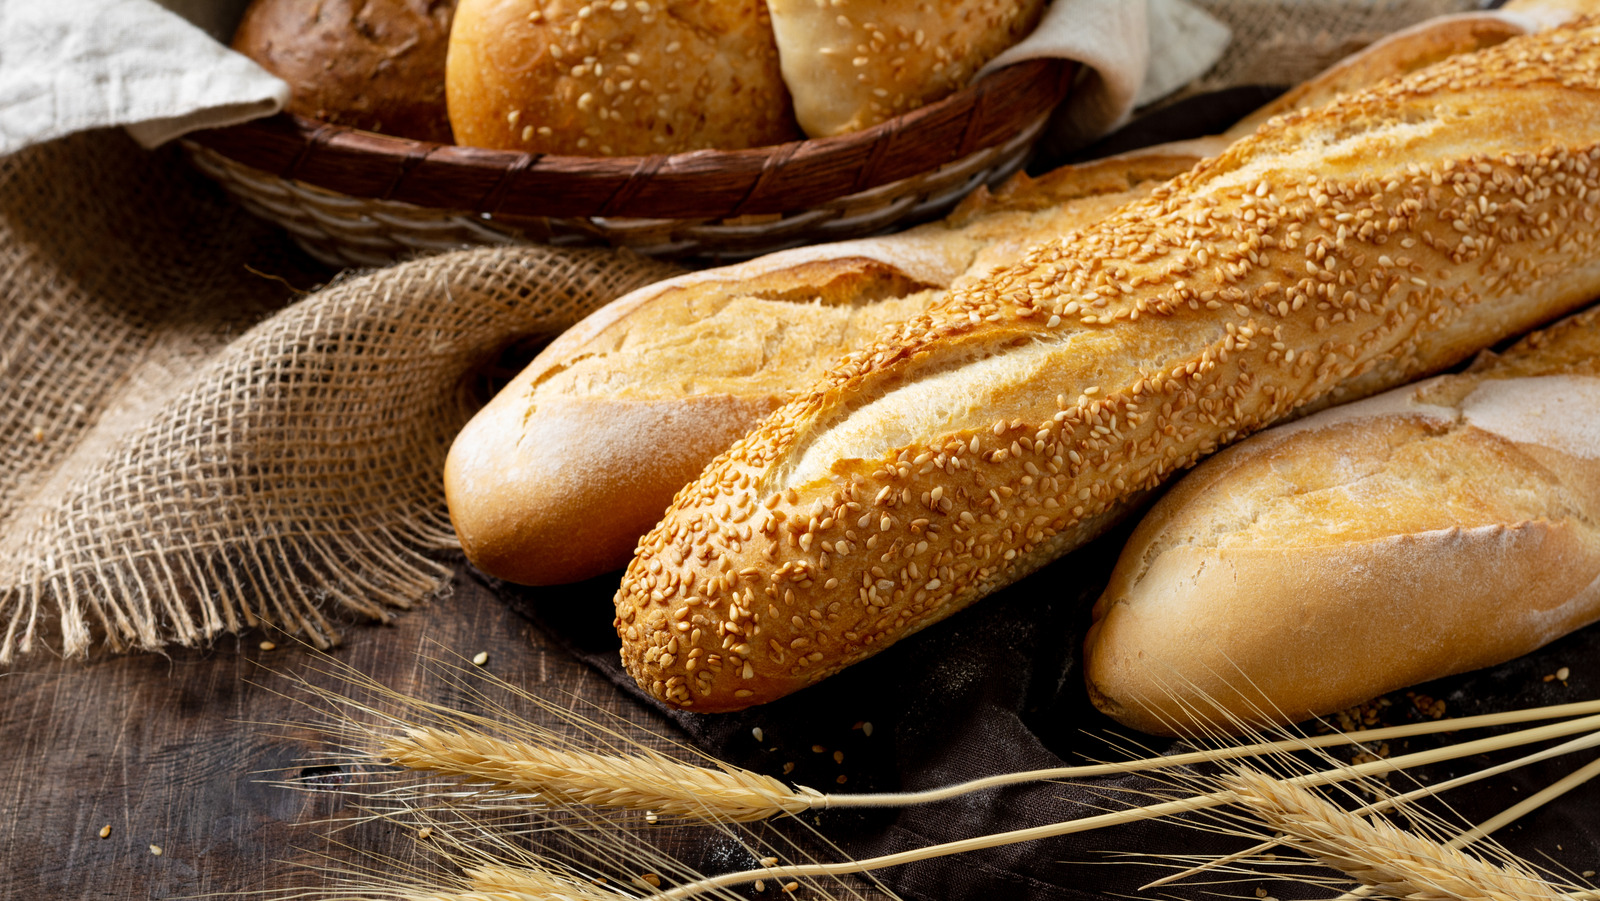 The Significant Role Bread Played In The French Revolution